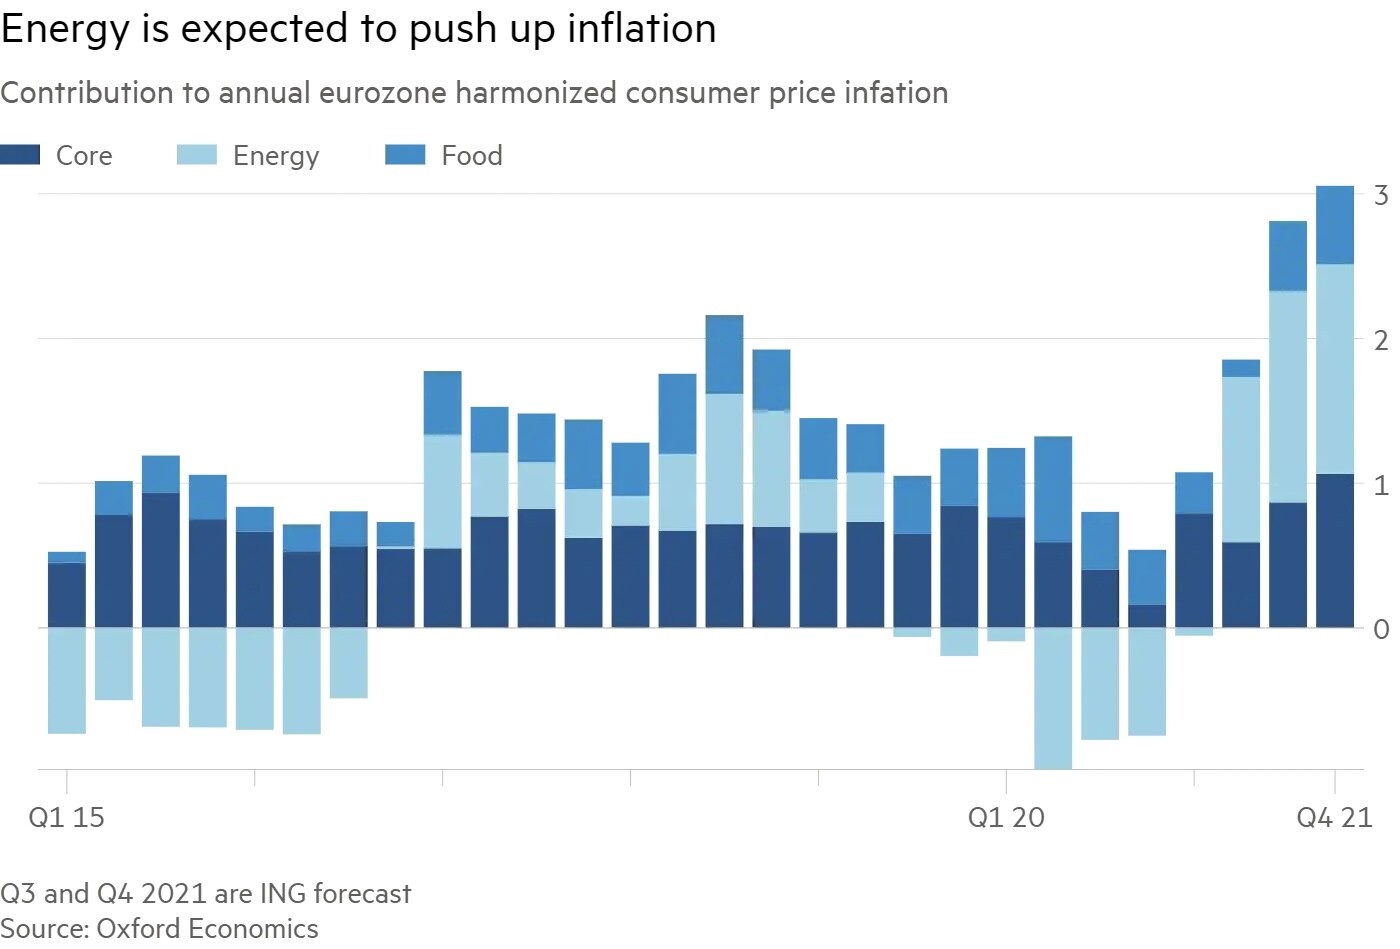 Energy is expected to push up inflation